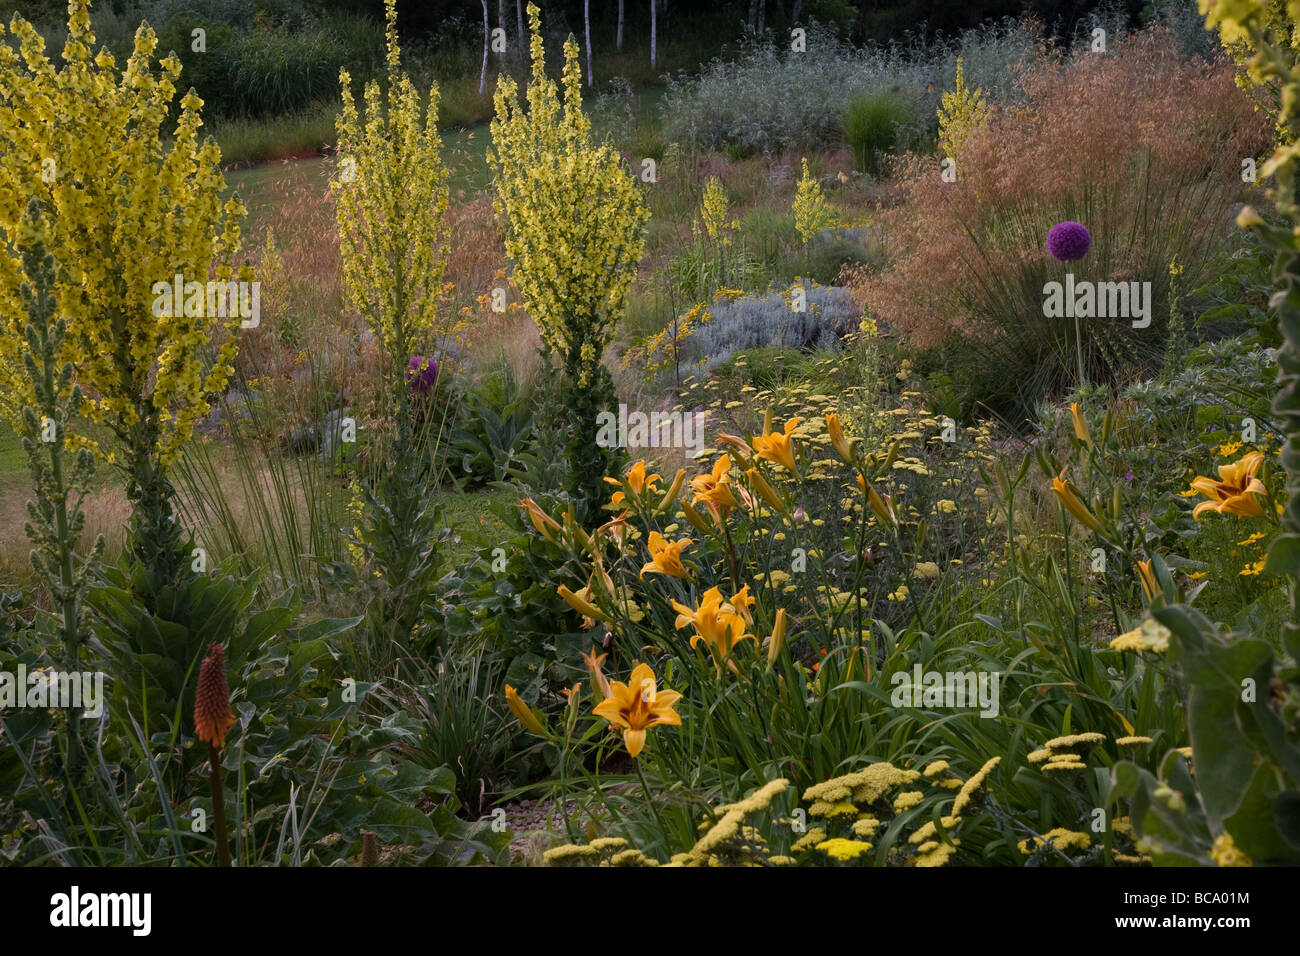 Prairie planting of perennials and grasses Stock Photo